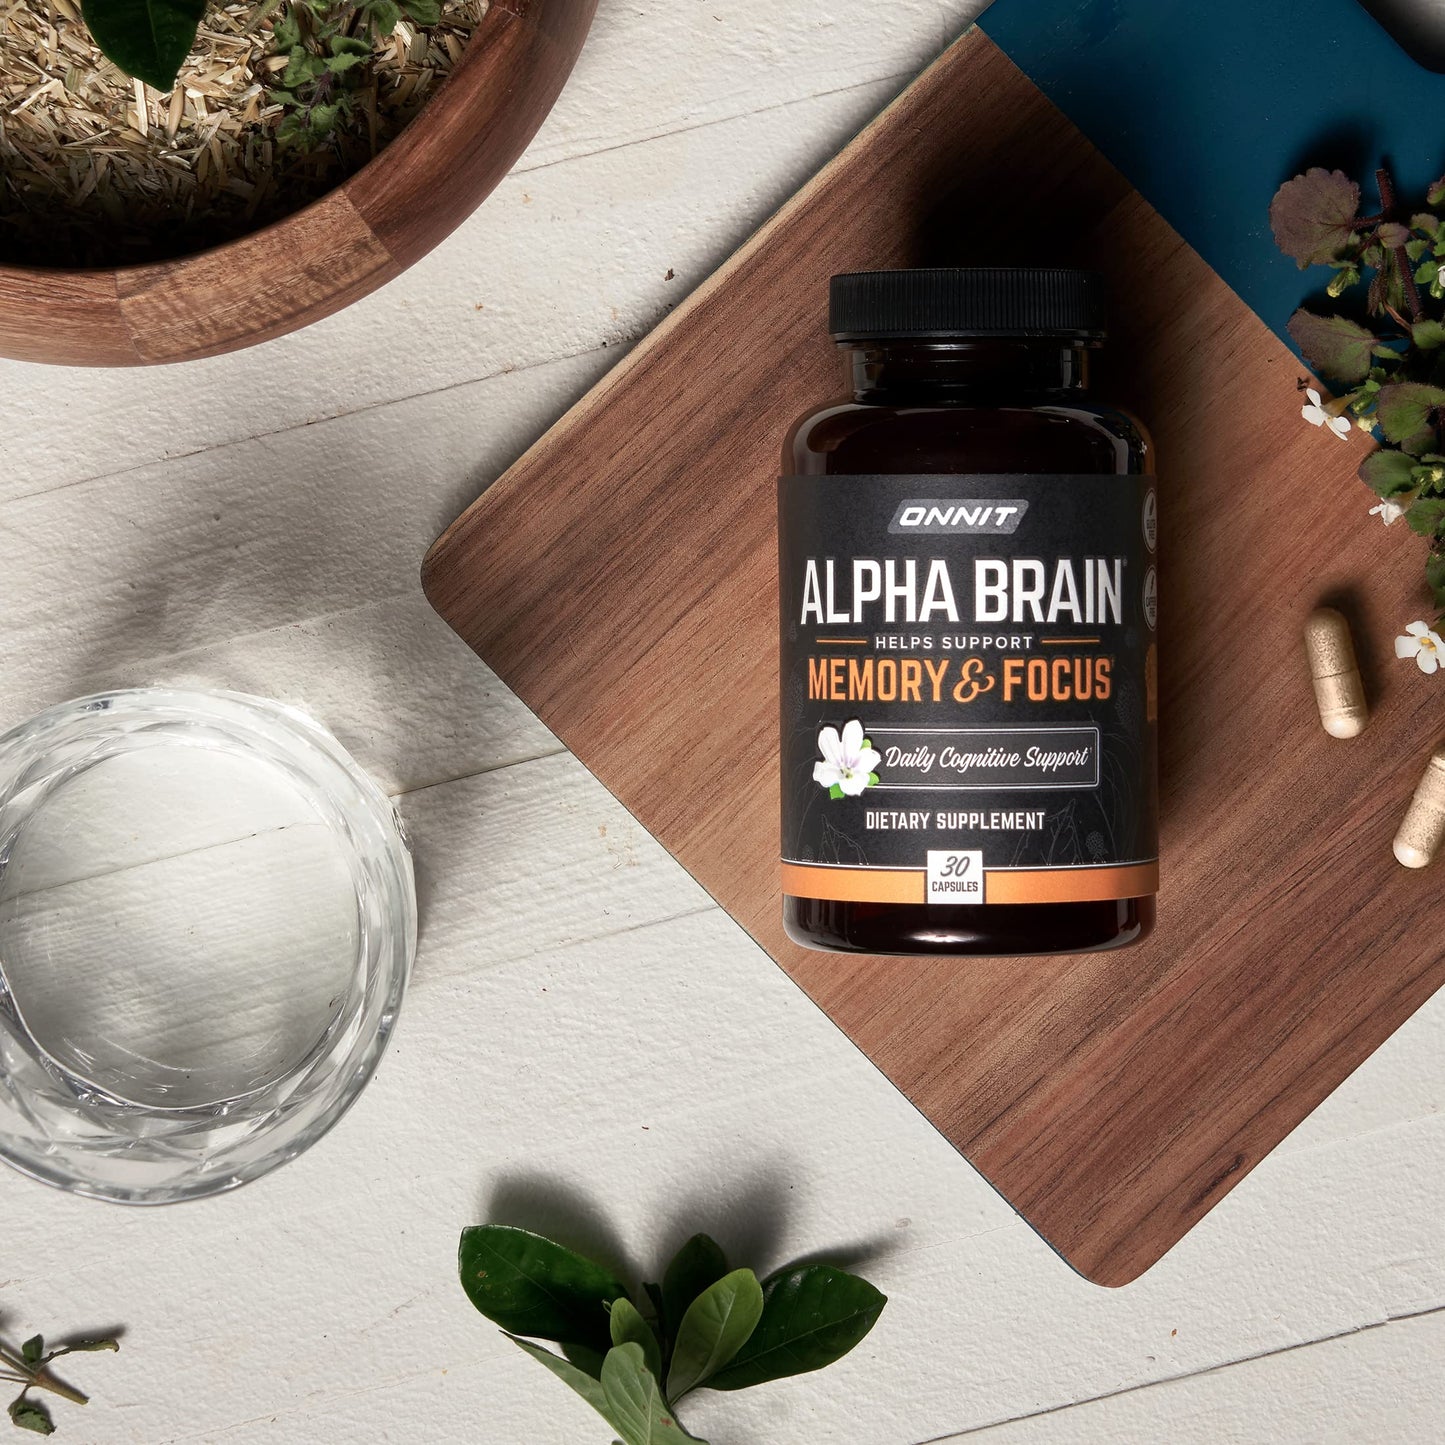 ONNIT Alpha Brain Premium Nootropic Brain Supplement, 30 Count, for Men & Women - Caffeine-Free Focus Capsules for Concentration, Brain Booster& Memory Support - Cat's Claw, Bacopa, Oat Straw